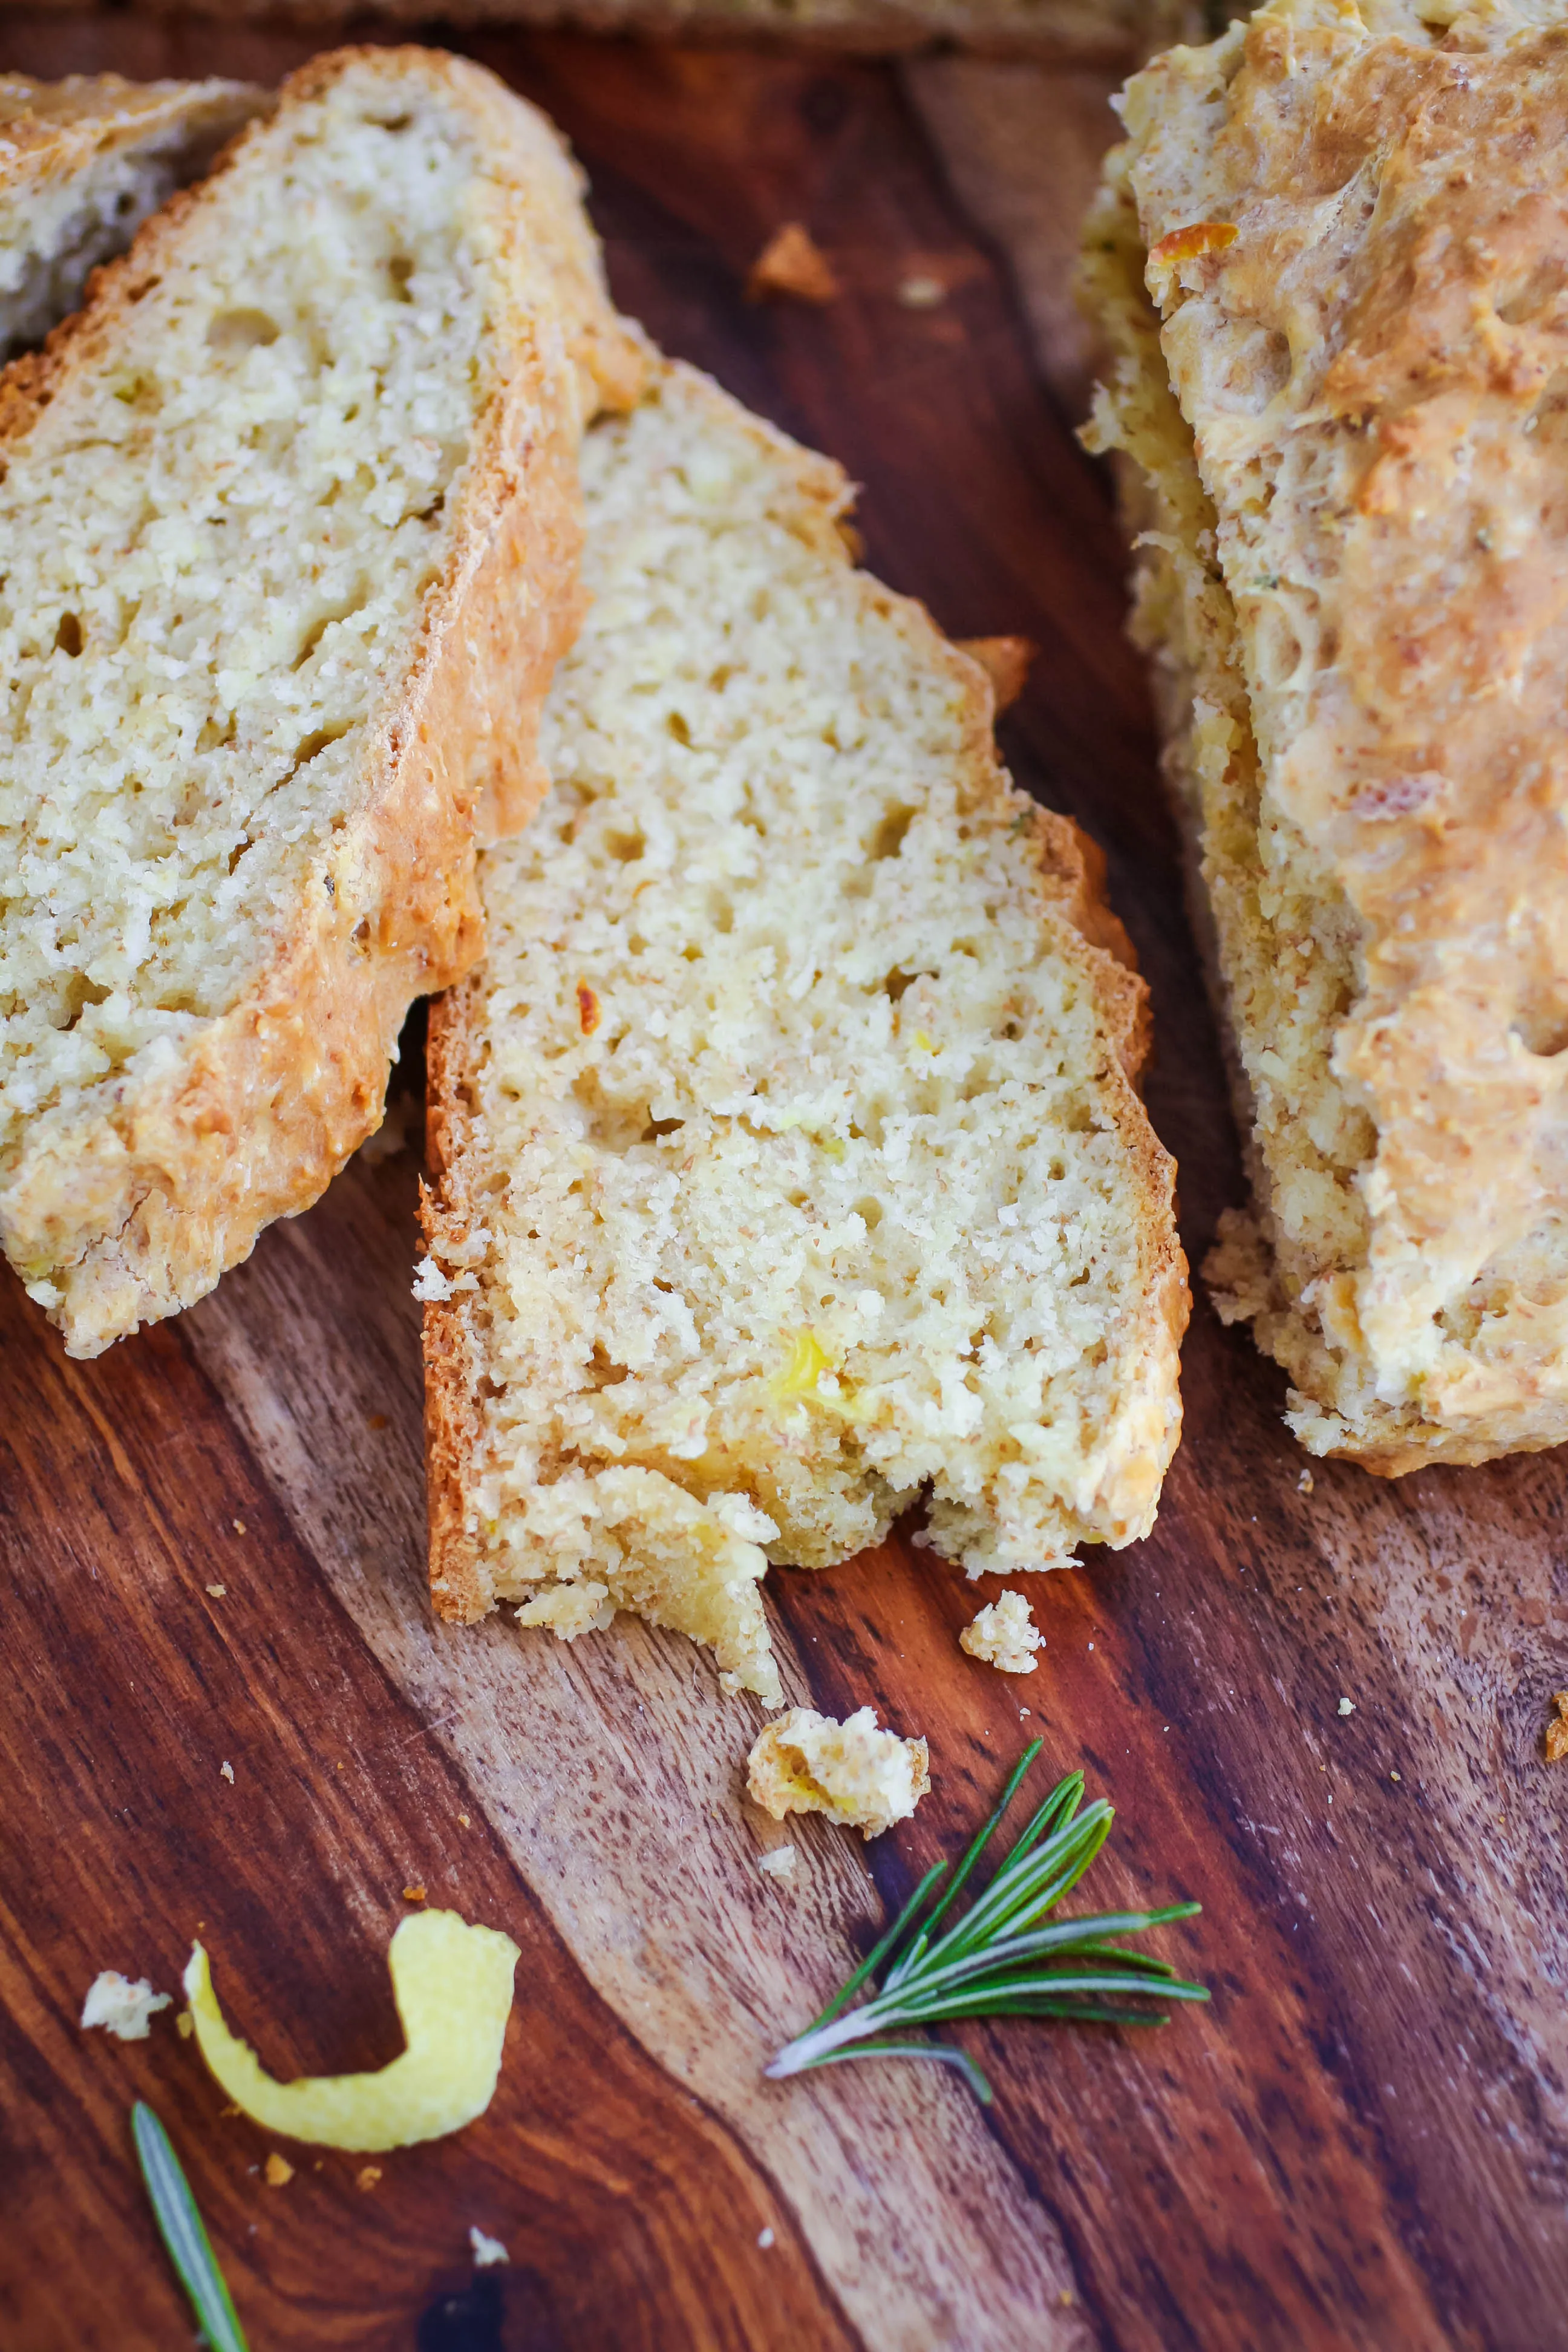 Irish Soda Bread with Rosemary & Lemon is a quick bread that is lightly crusty on the outside, and soft on the inside. Irish Soda Bread with Rosemary & Lemon is so easy to make any time of year.